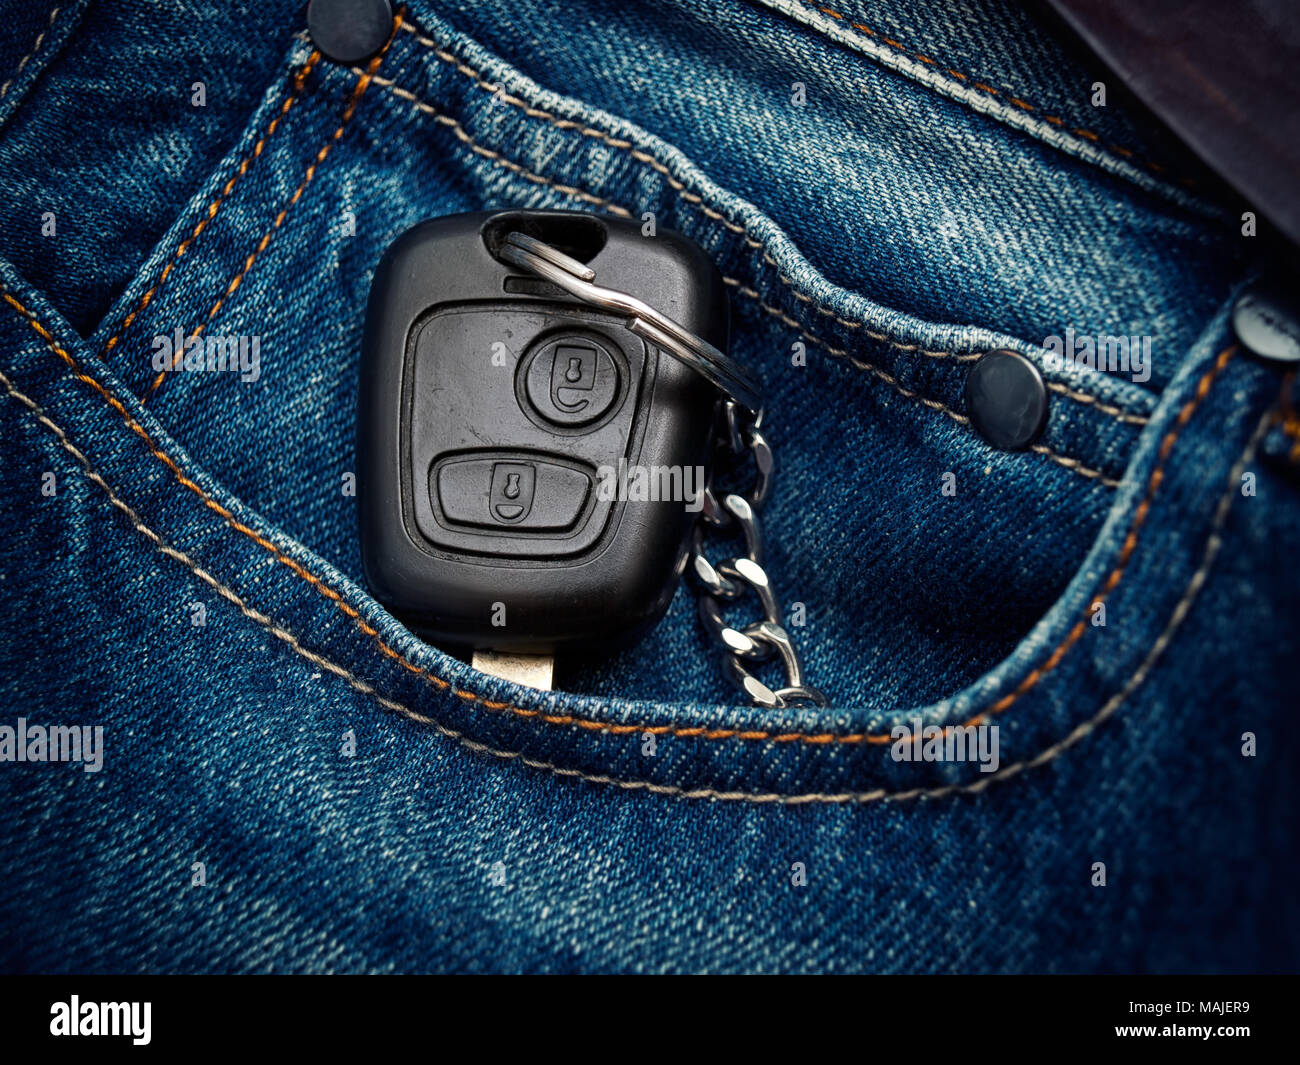 Car key in the jeans pocket. Stock Photo